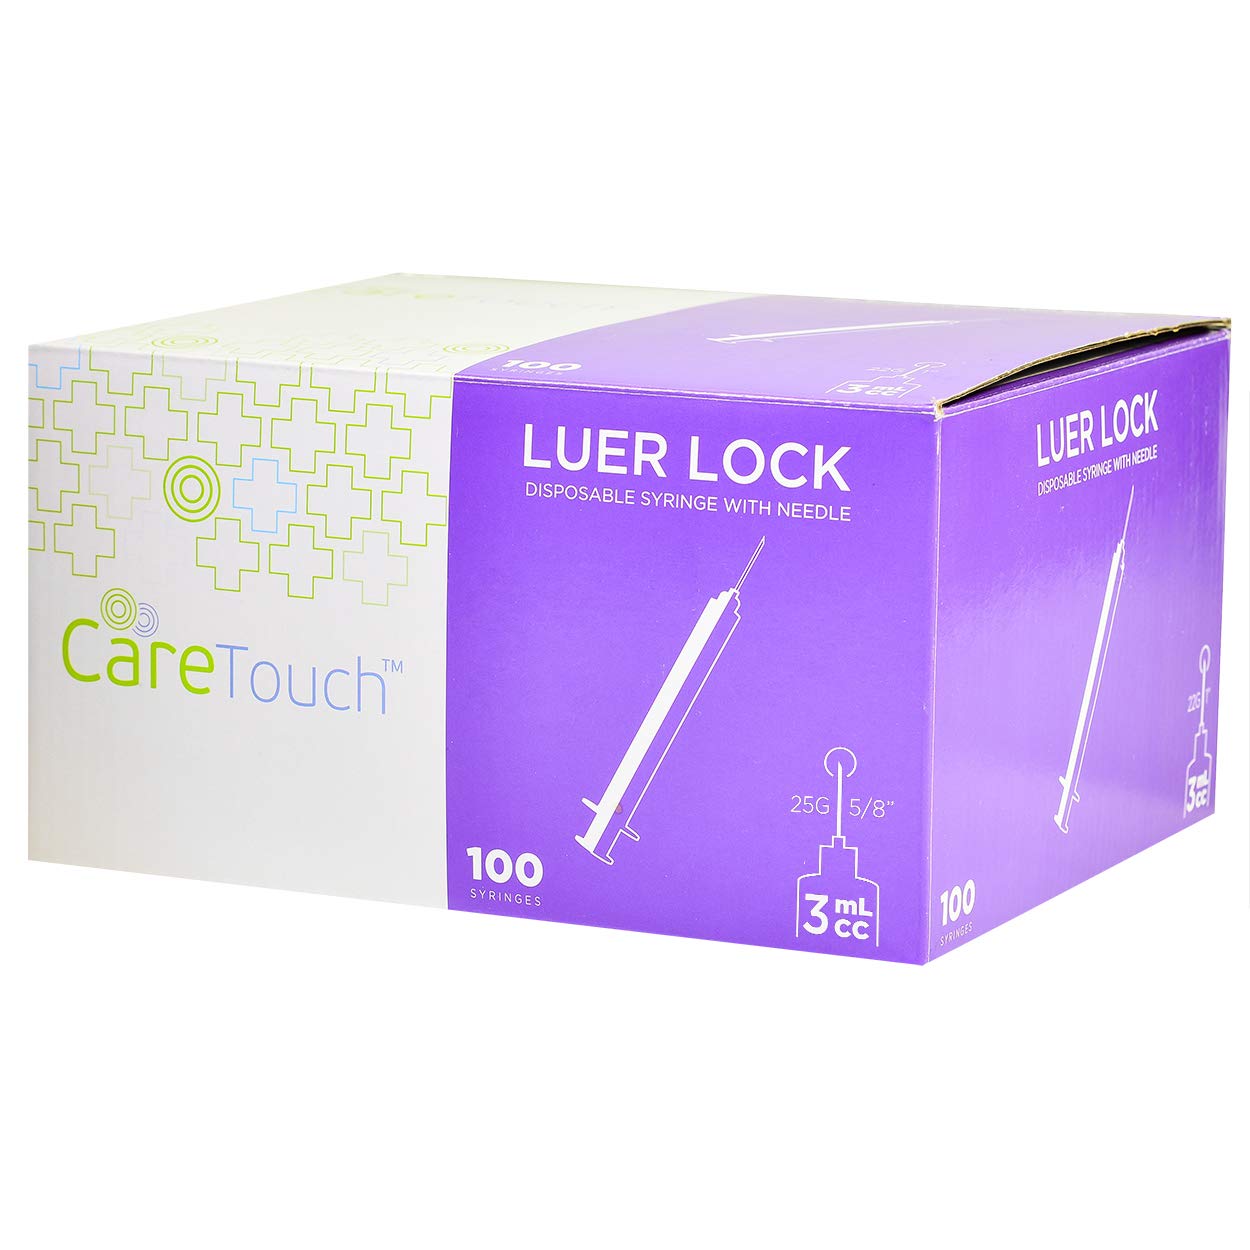 Care Touch Syringes Luer Lock with Needles, 3ml 25GX5/8 (Case of 12 units)